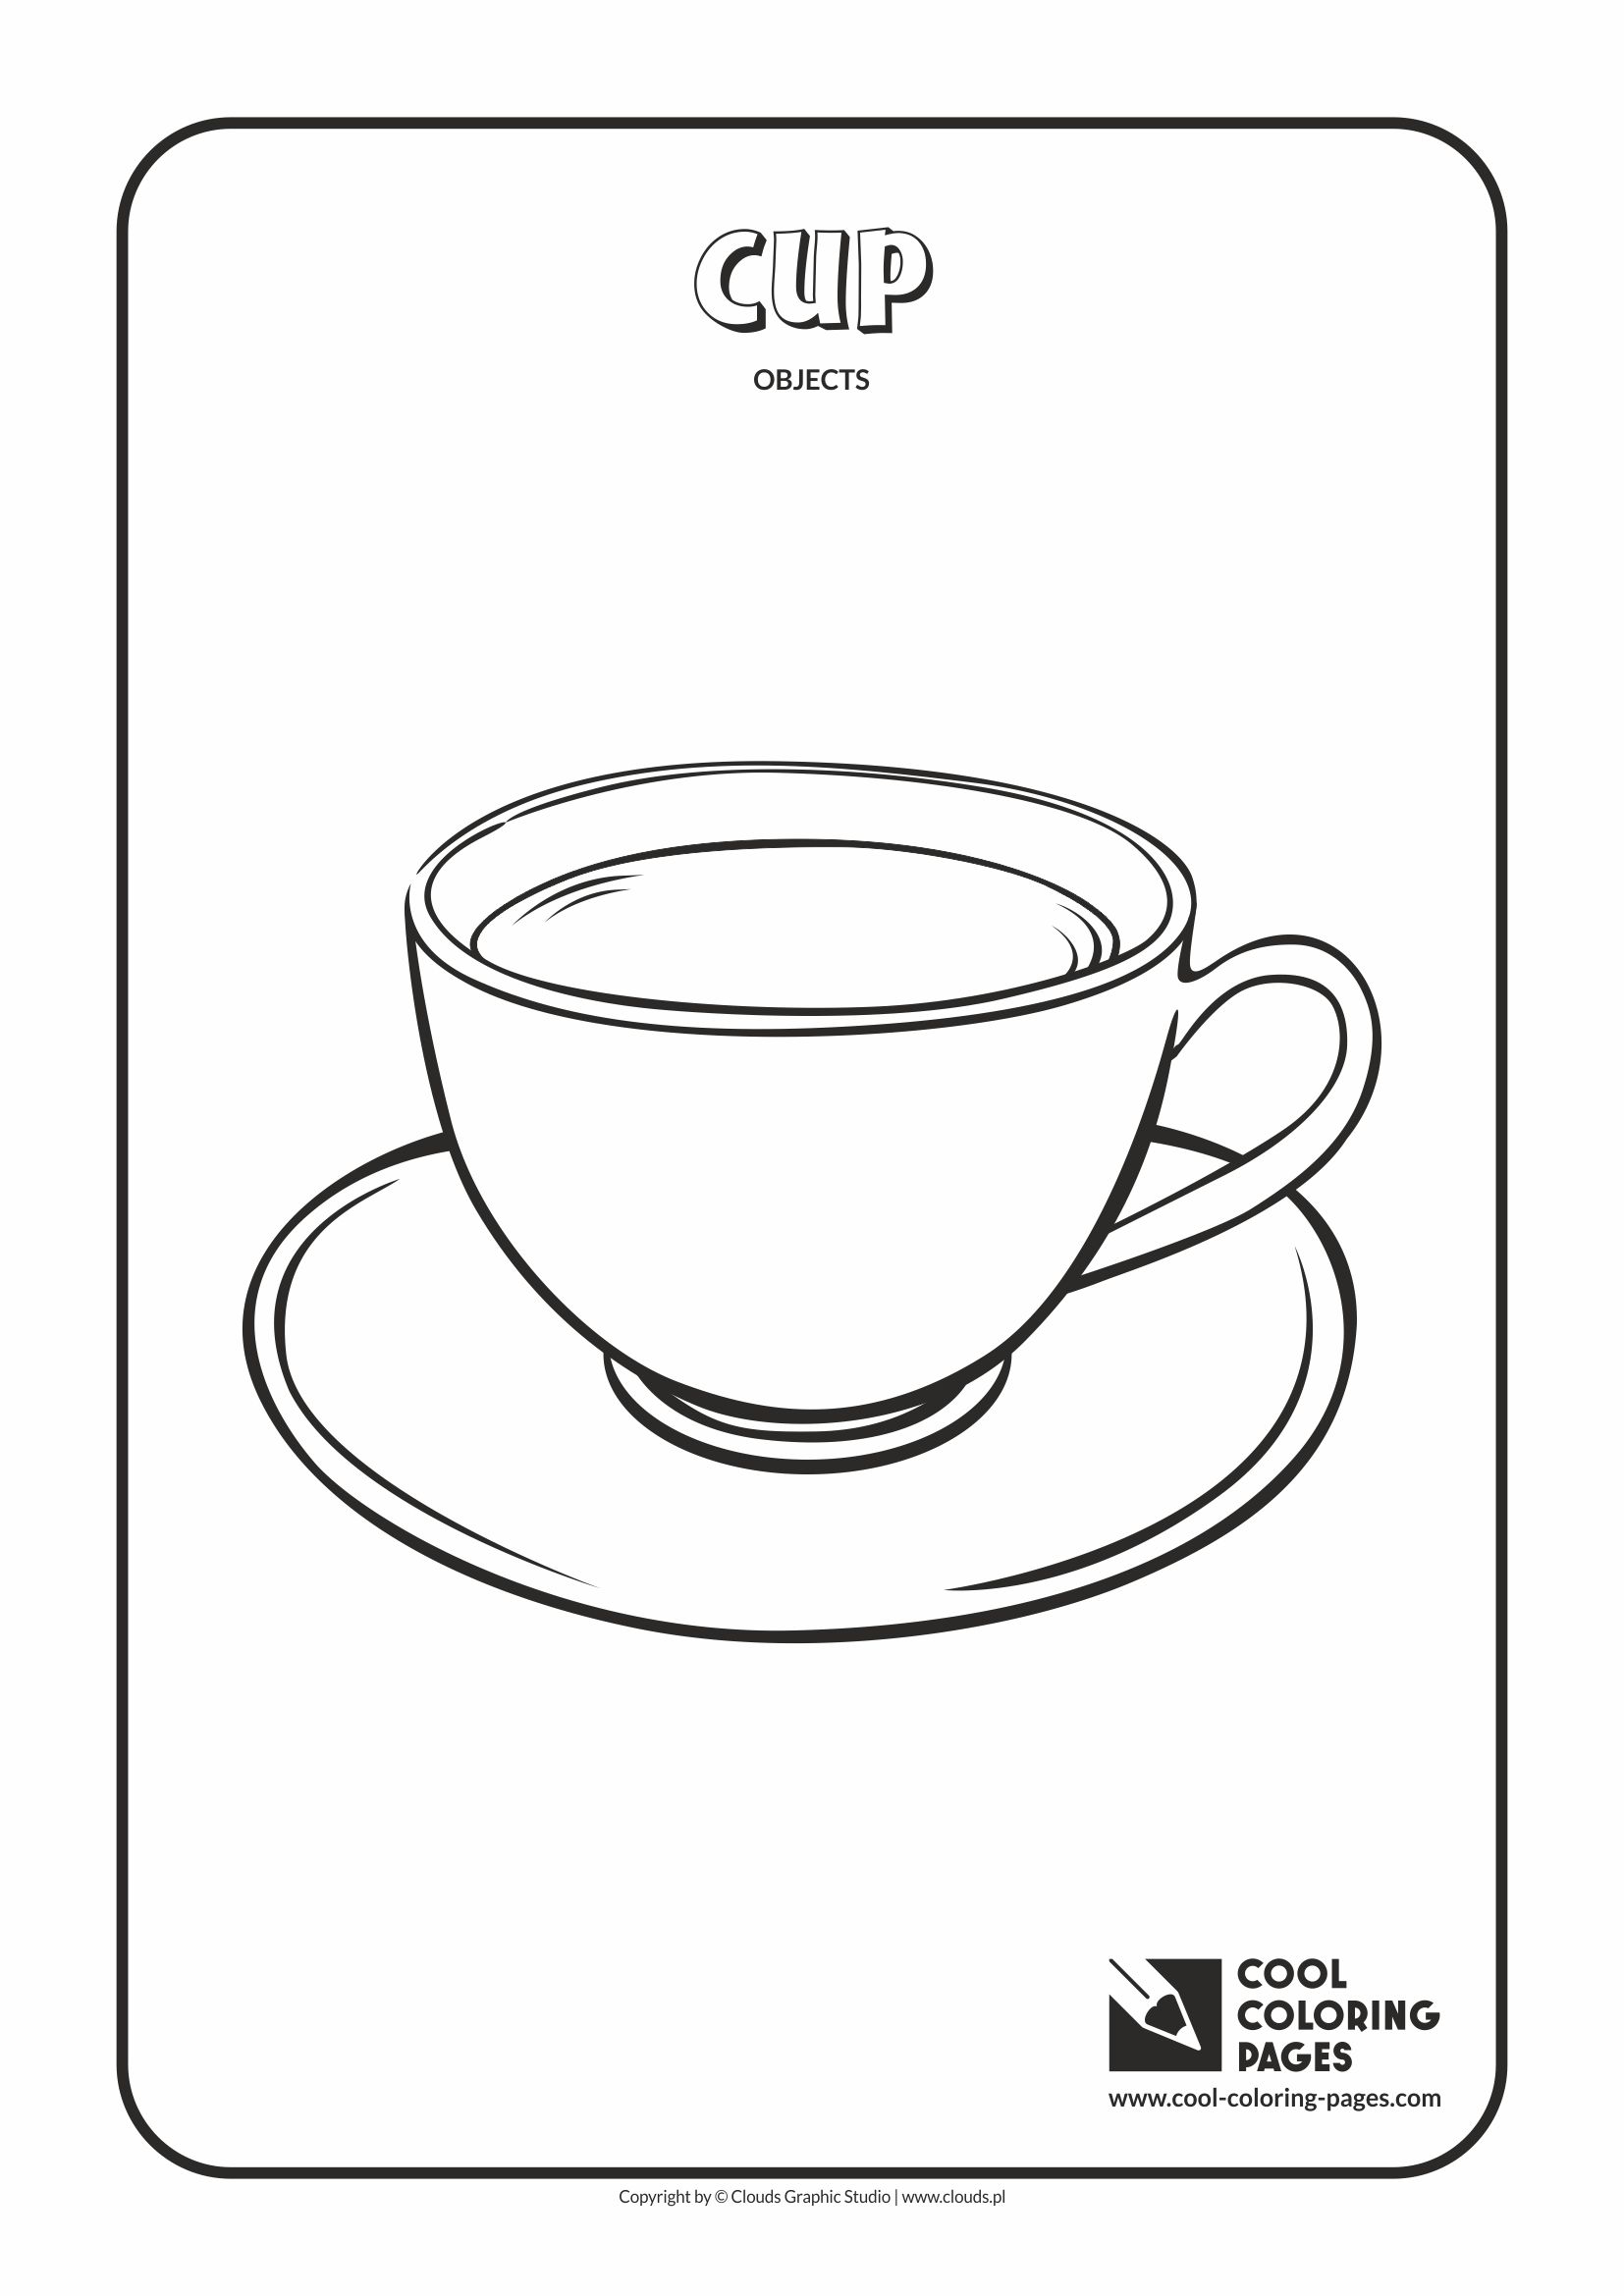 Cool Coloring Pages Coloring Objects - Cool Coloring Pages | Free educational coloring ...1654 x 2339